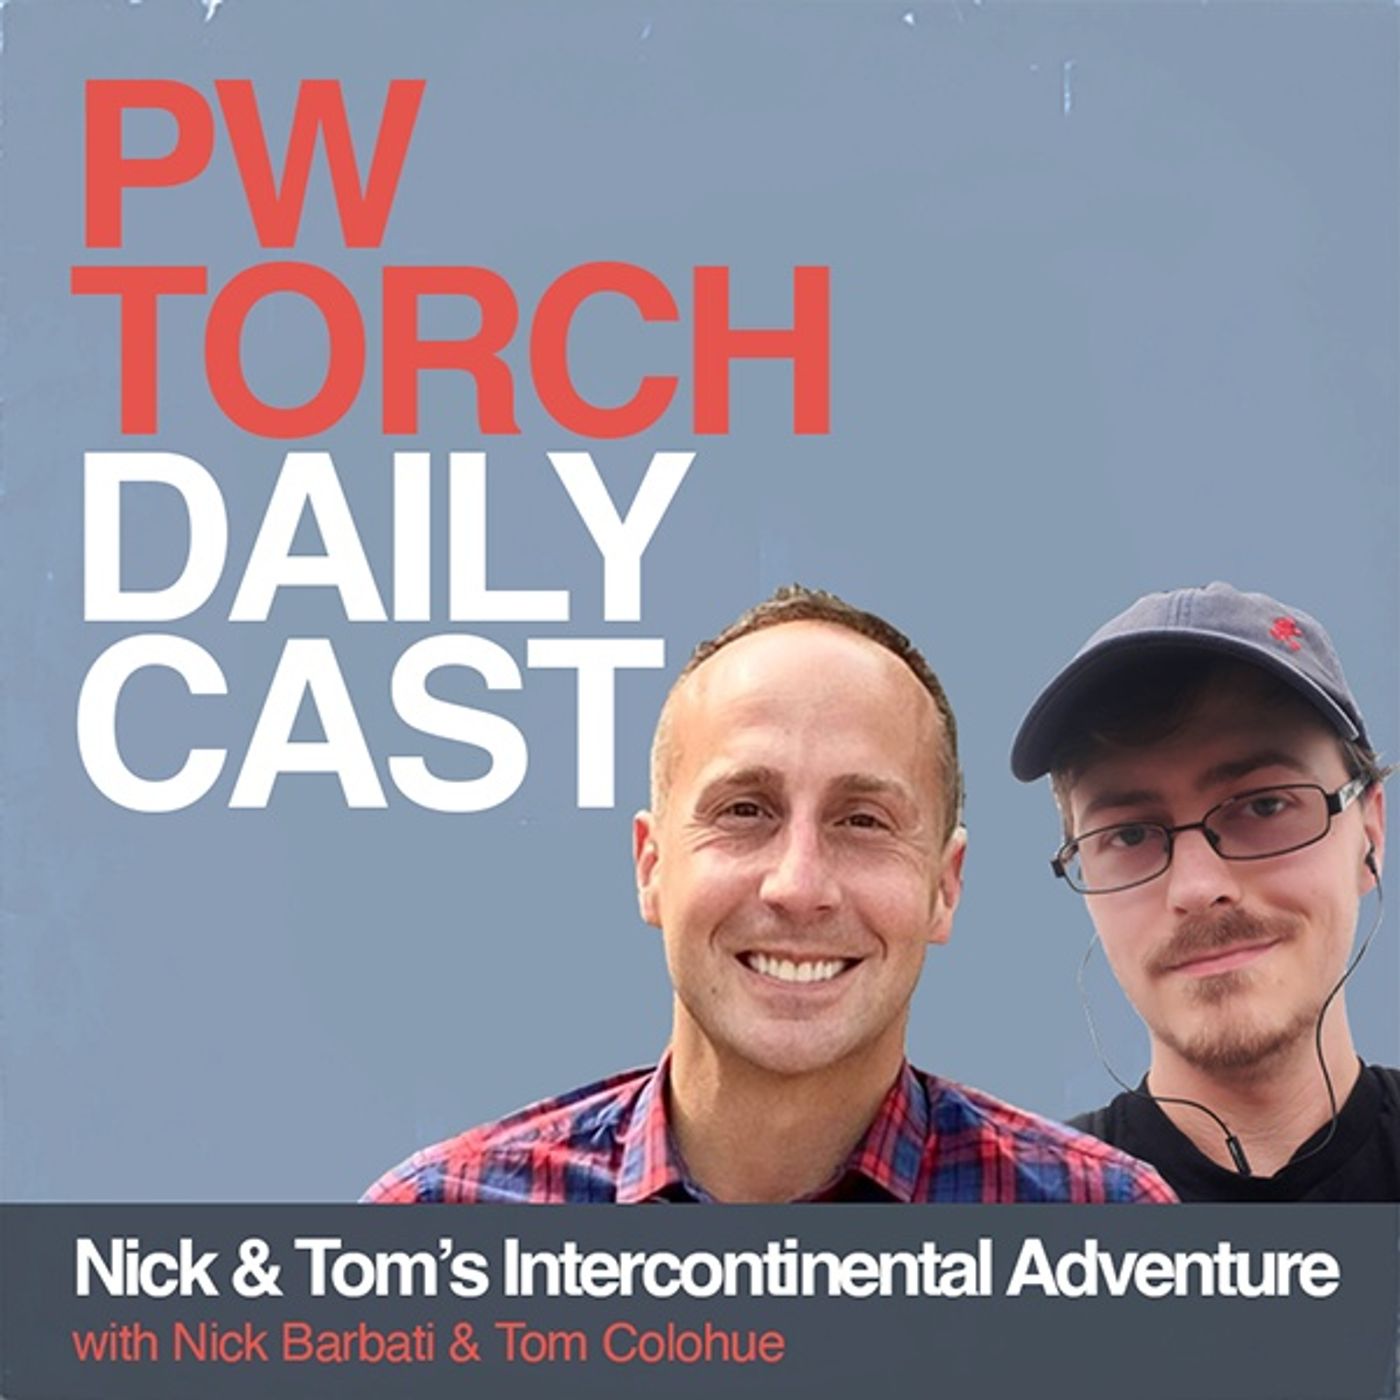 PWTorch Dailycast – Nick & Tom’s Intercontinental Adventure - Summerslam Predictions + 5 Yrs Ago Flashback of Mike & Andrew